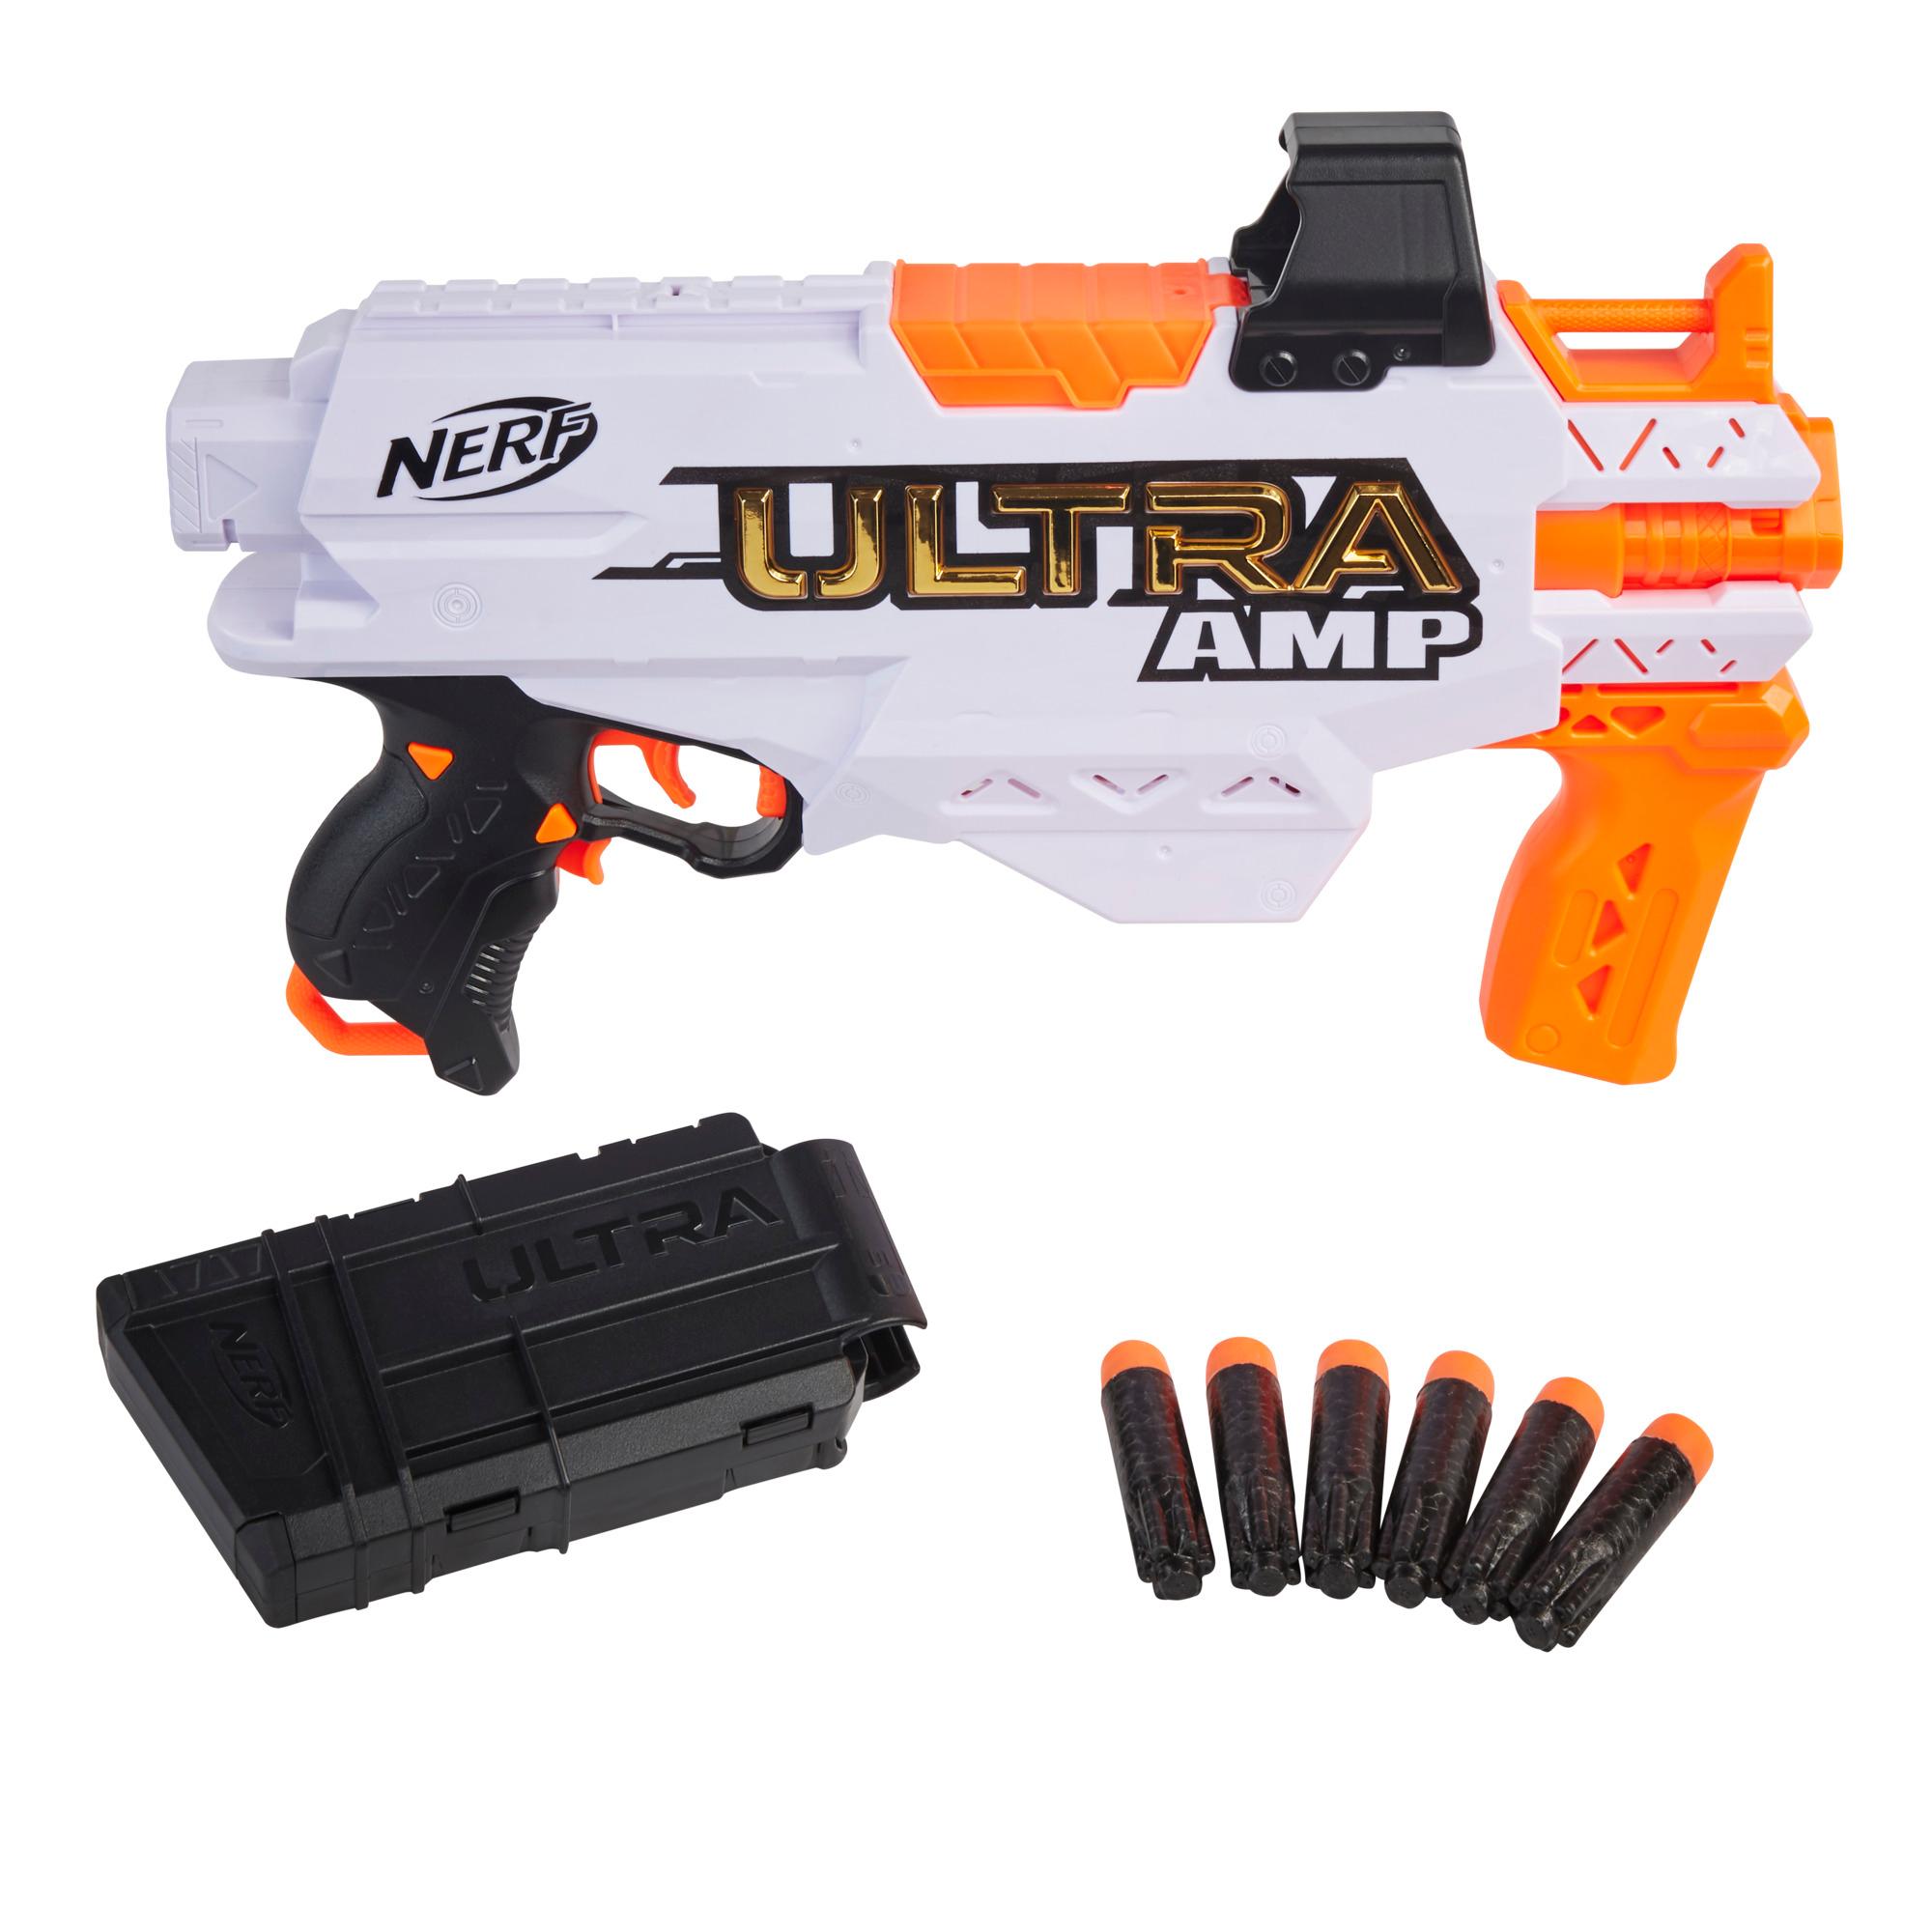 Nerf Ultra Amp Motorized Blaster, 6-Dart Clip, 6 Darts, Compatible Only with Nerf Ultra Darts